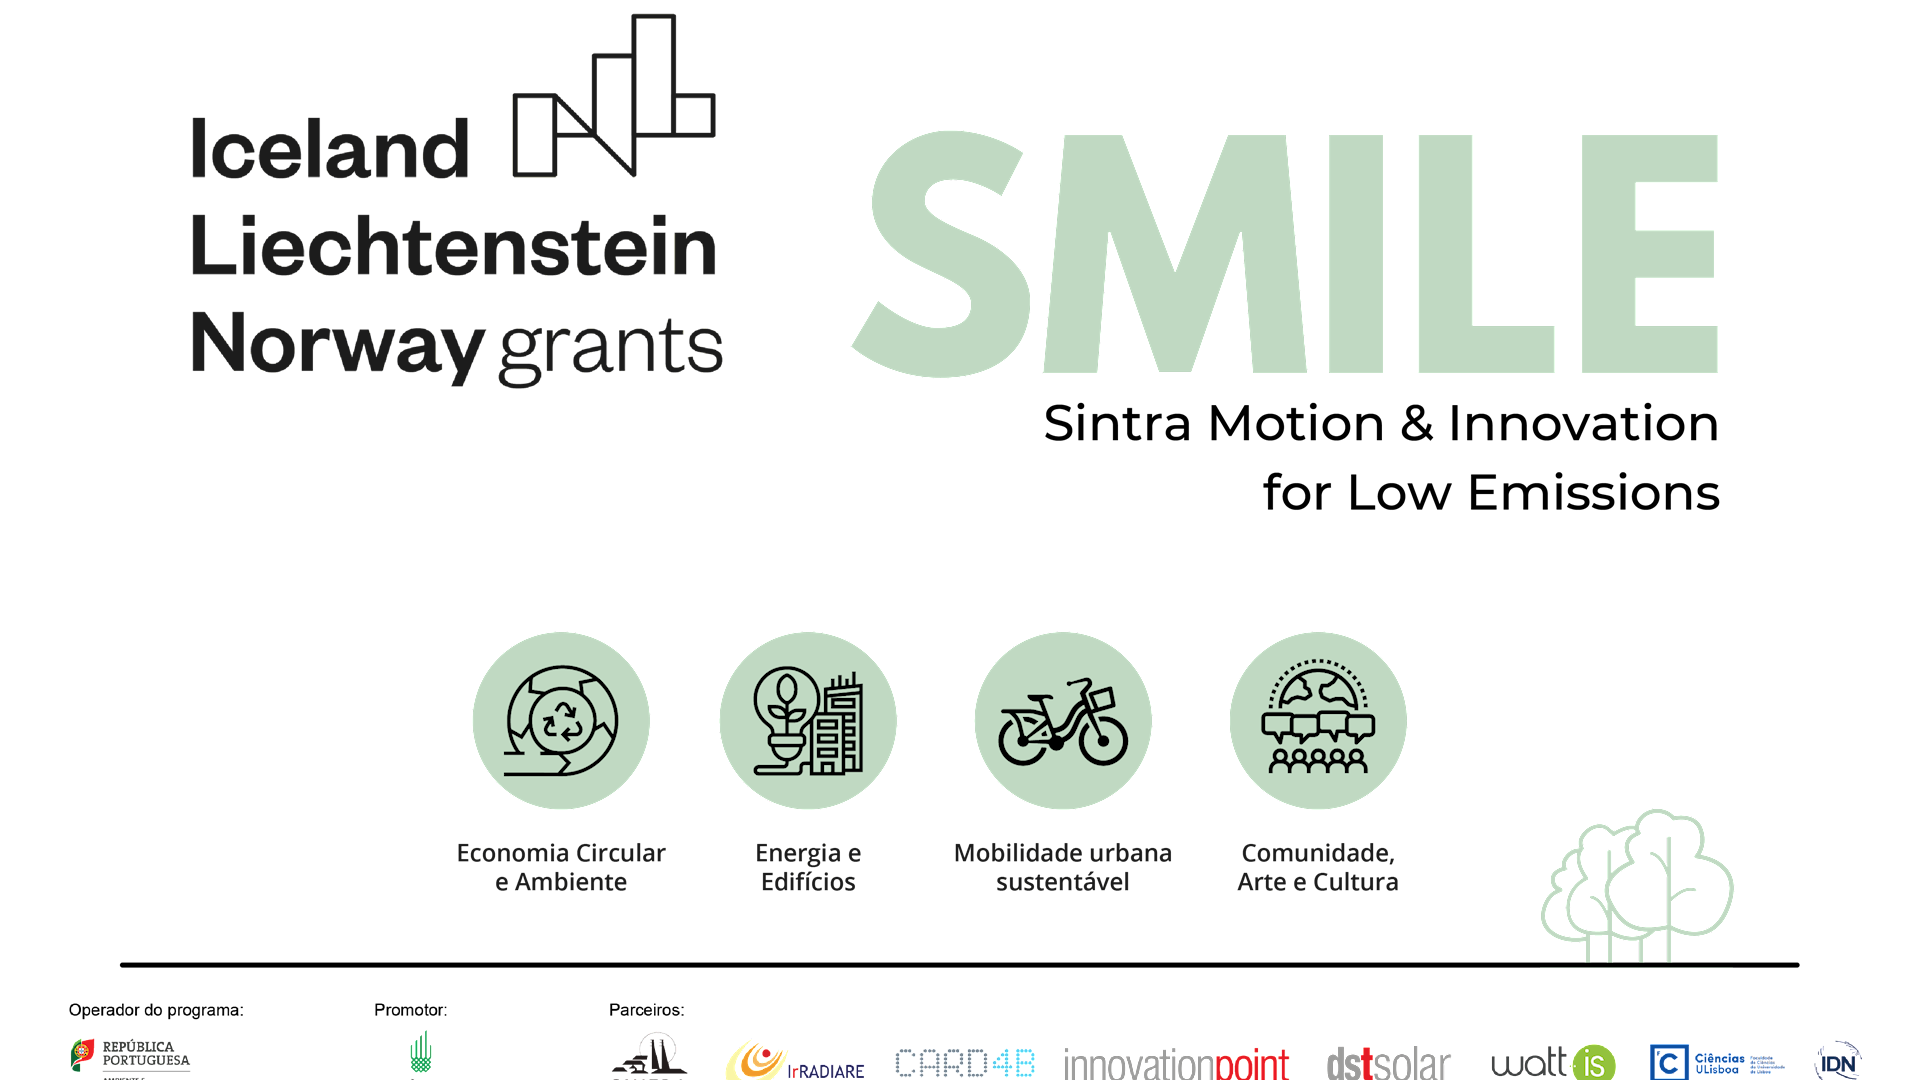 SMILE - Sintra Motion & Innovation for Low Emissions